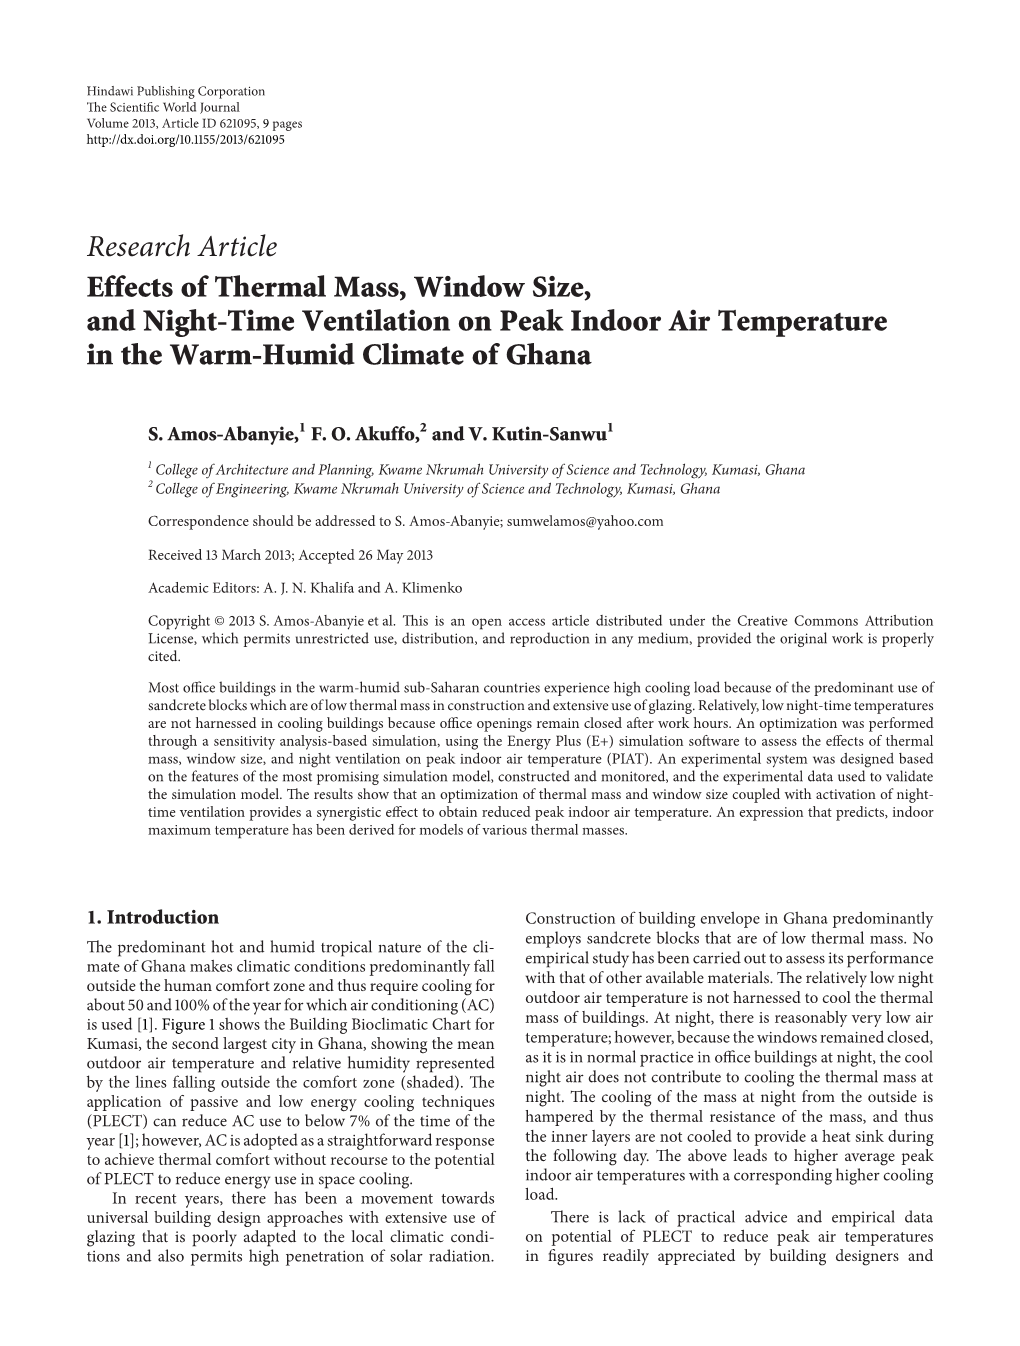 Research Article Effects of Thermal Mass, Window Size, and Night-Time Ventilation on Peak Indoor Air Temperature in the Warm-Humid Climate of Ghana